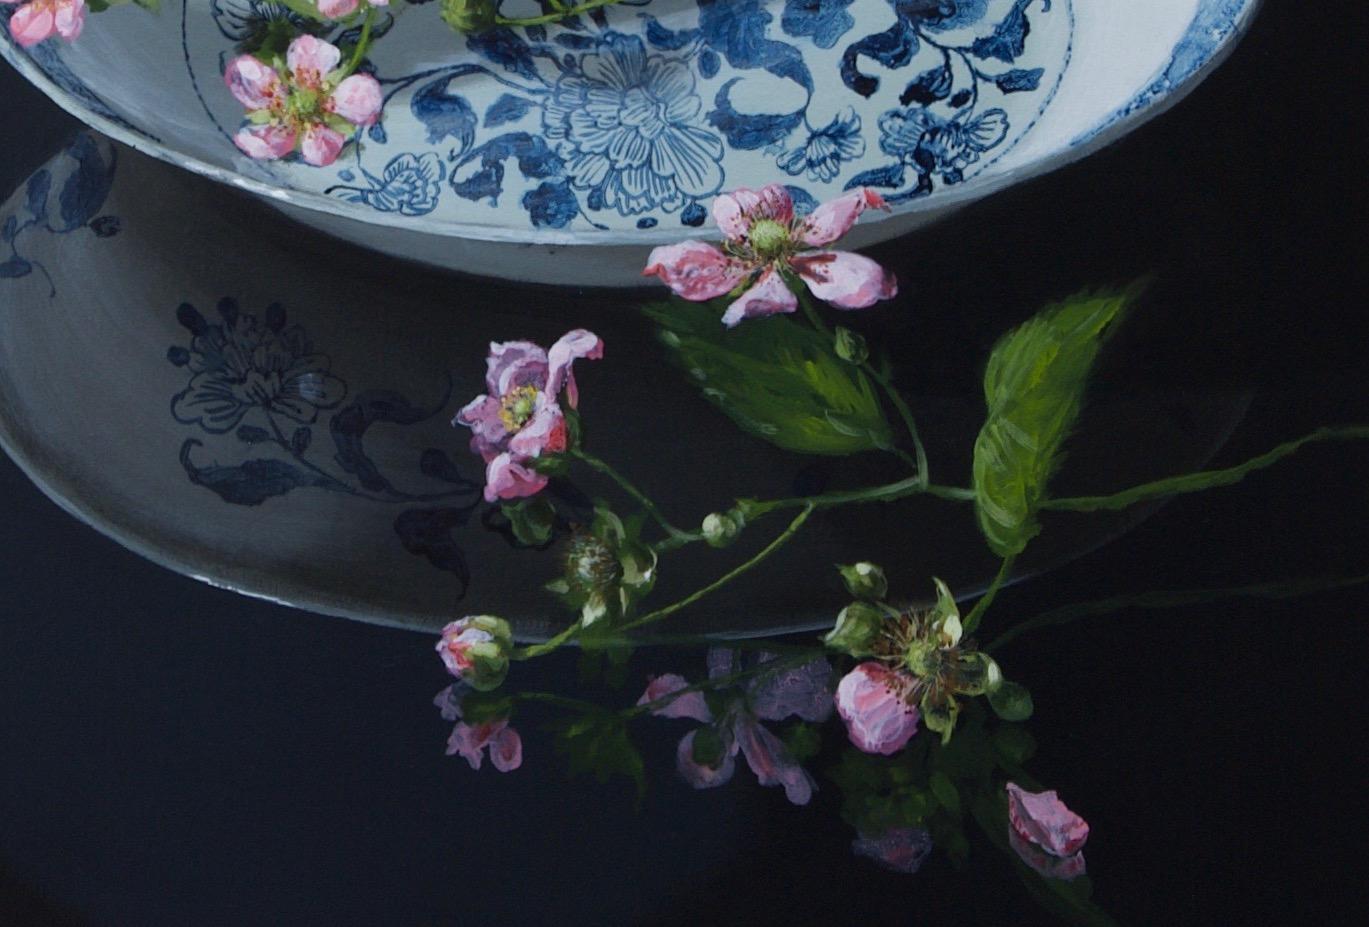 When you look at this painting Chinese Plate with Blackberryblossom by Dutch artist Sasja Wagenaar (1959) from a distance you see a perfectly painted image, but up close a generous paint streak is visible. She has a unique way of applying shadow and